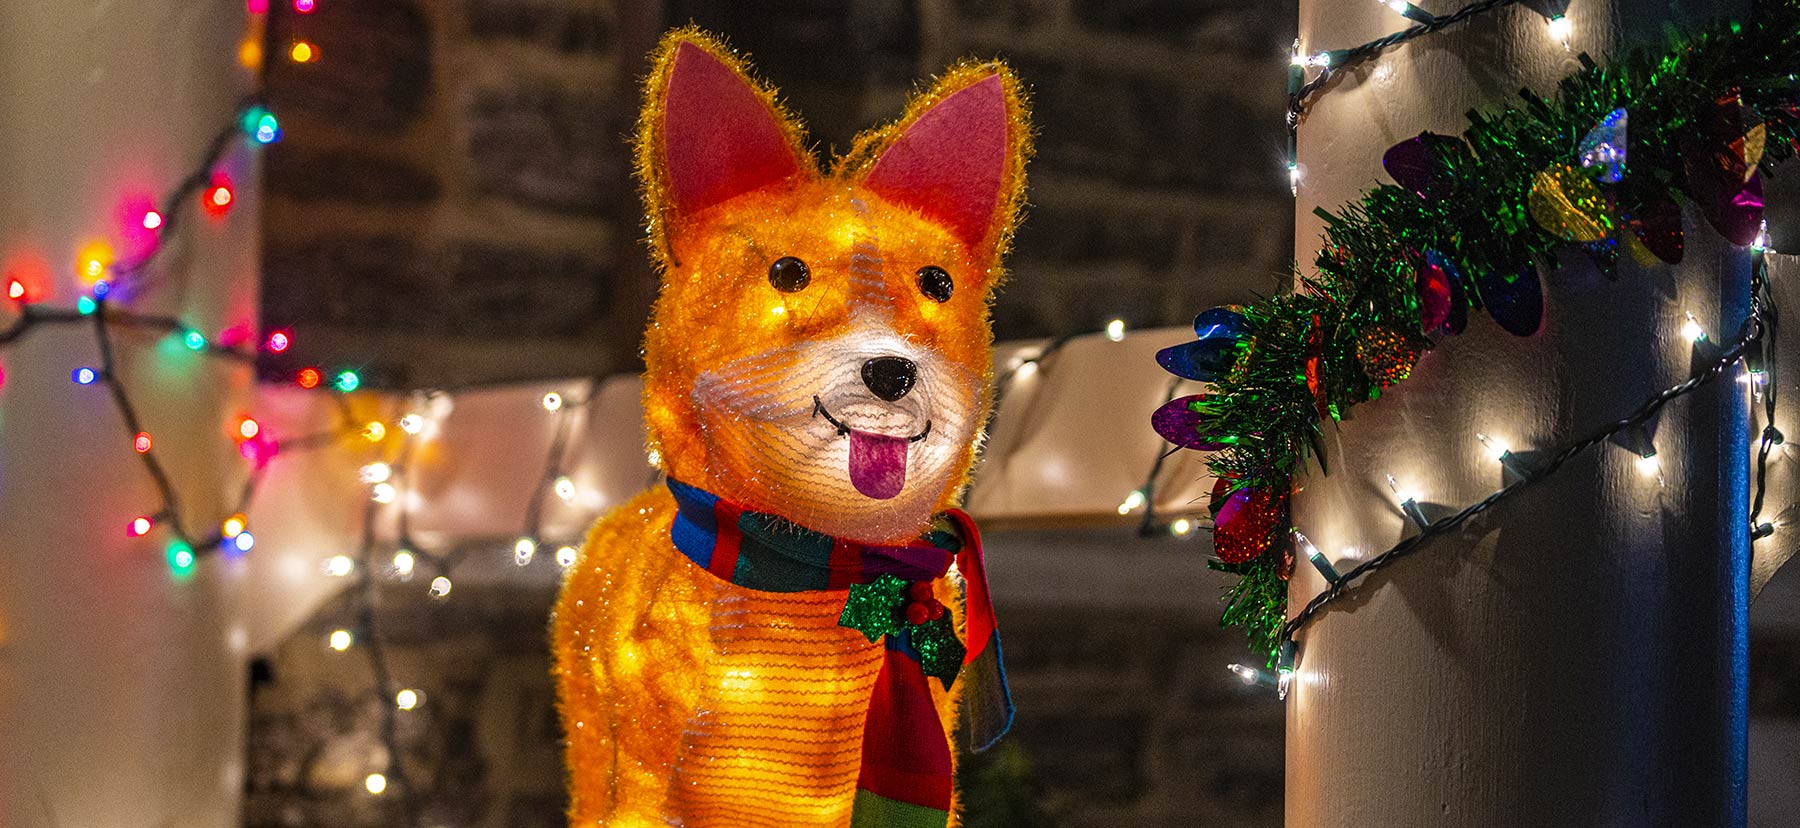 A festive light-up dog in a scarf